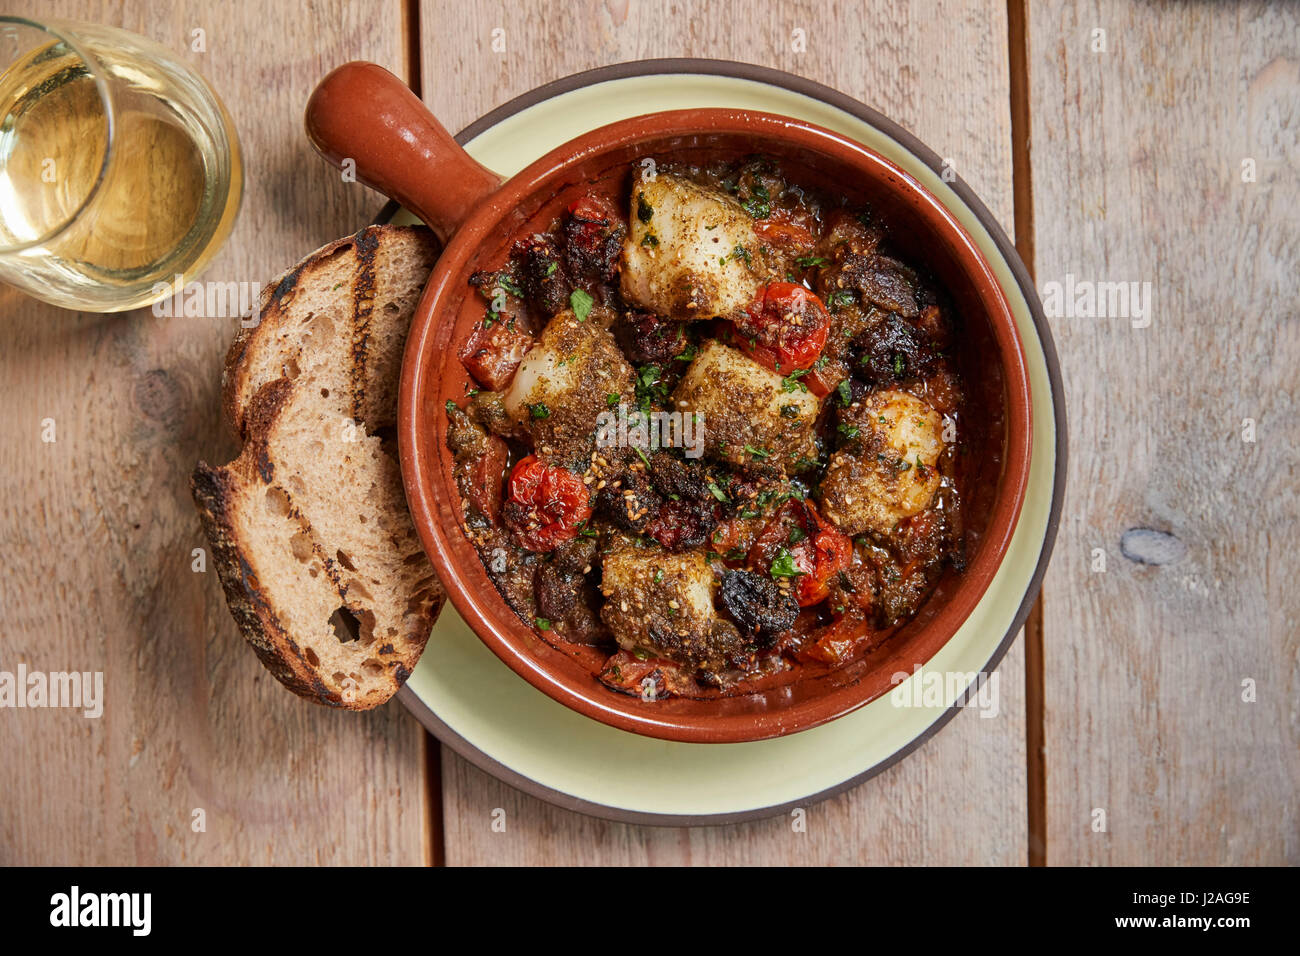 Cod and chorizo bake with grilled sourdough, overhead view Stock Photo